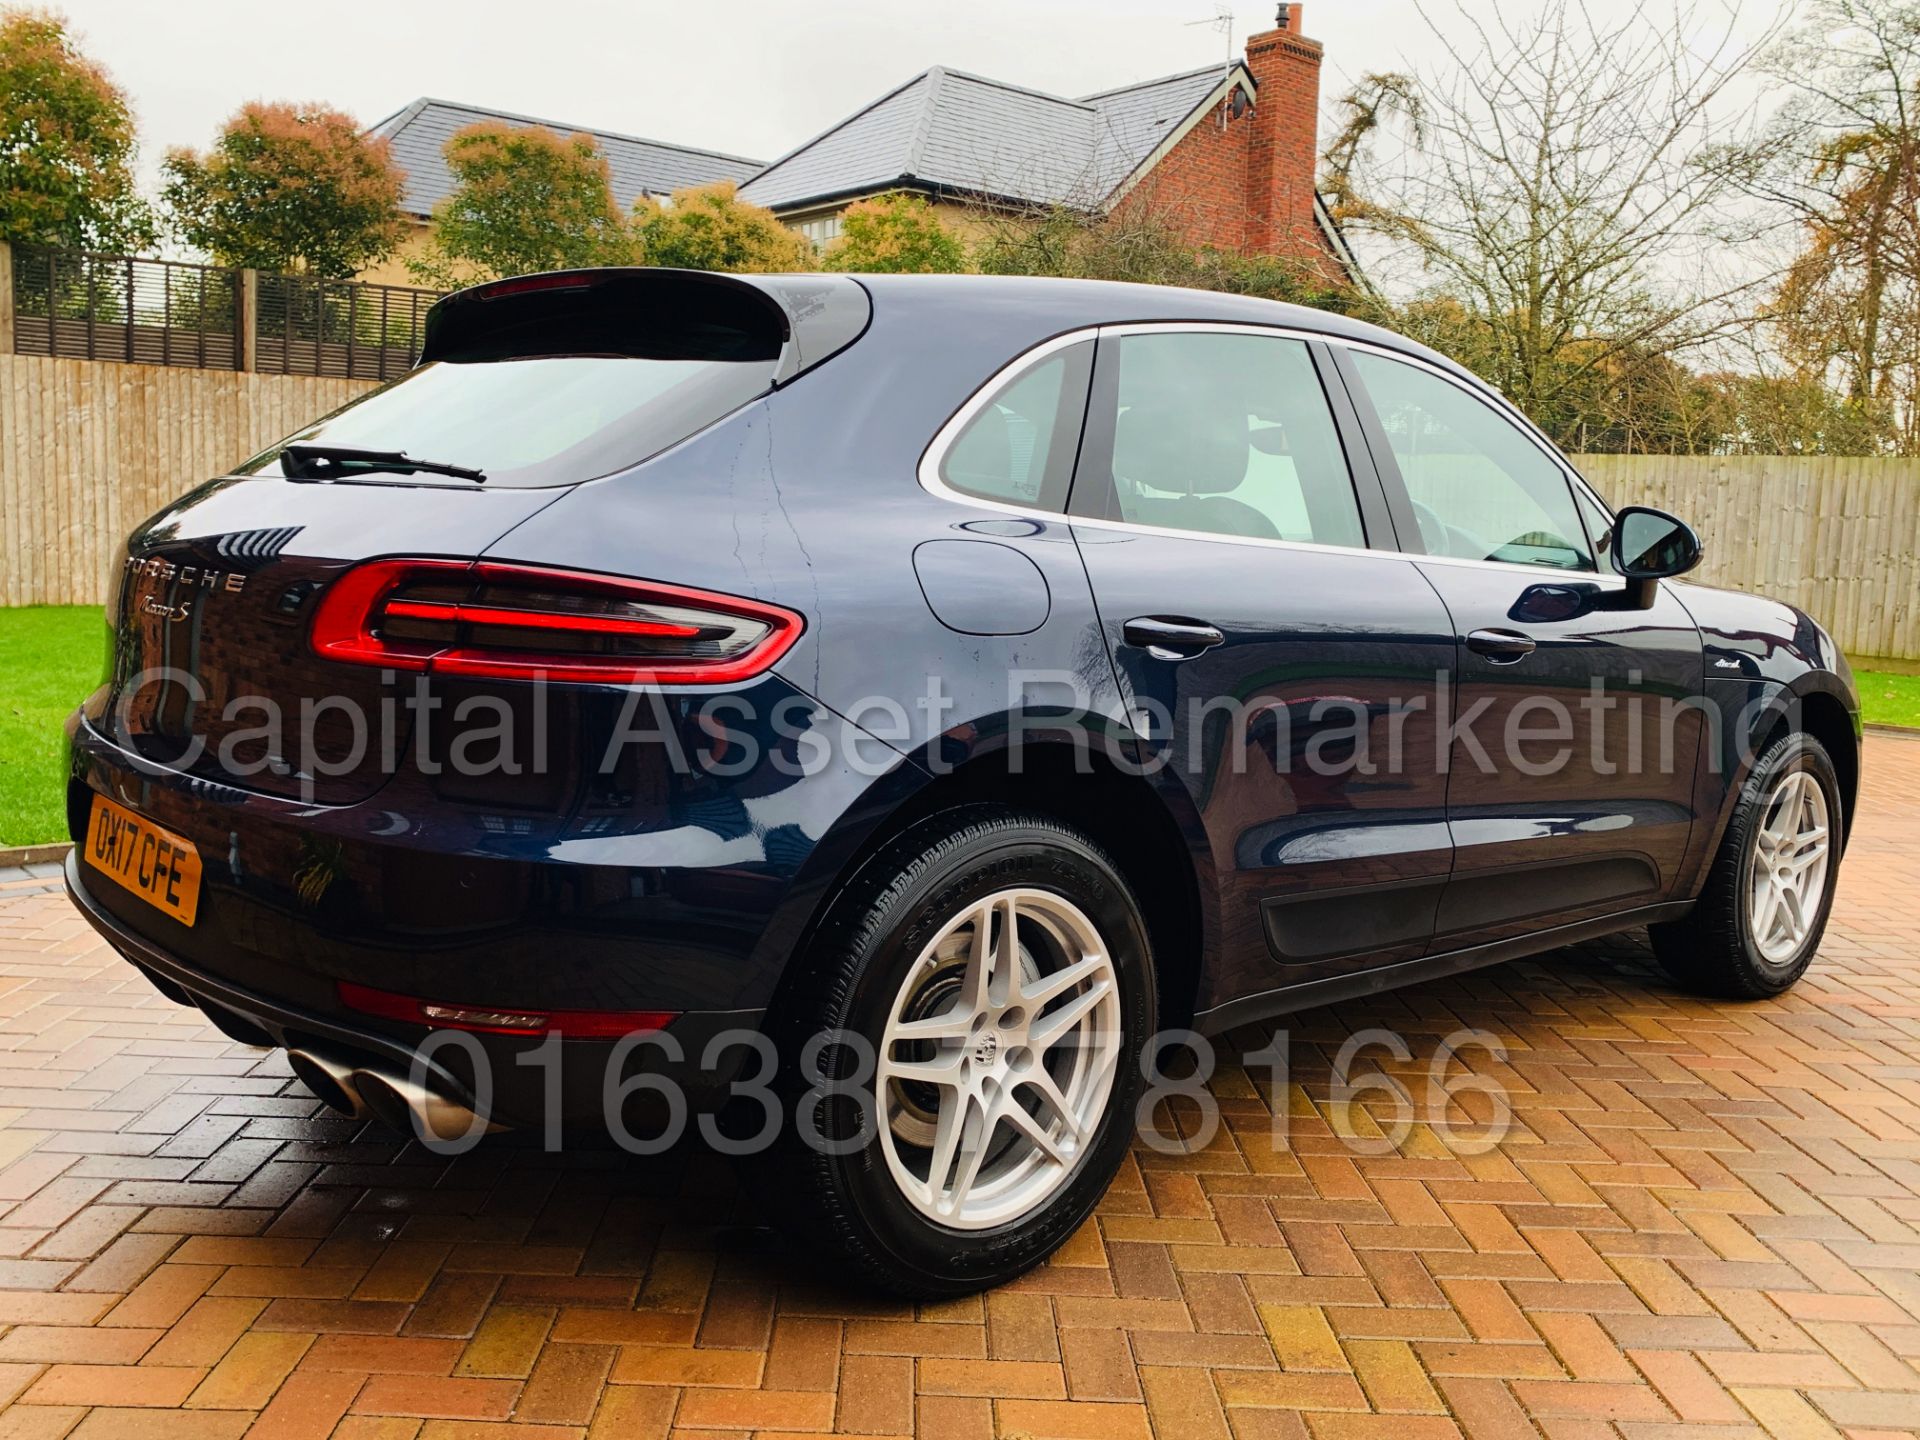 On Sale PORSCHE MACAN S *SPORTS SUV* (2017 - NEW MODEL) '3.0 V6 DIESEL - 258 BHP - PDK AUTO' * WOW* - Image 13 of 71